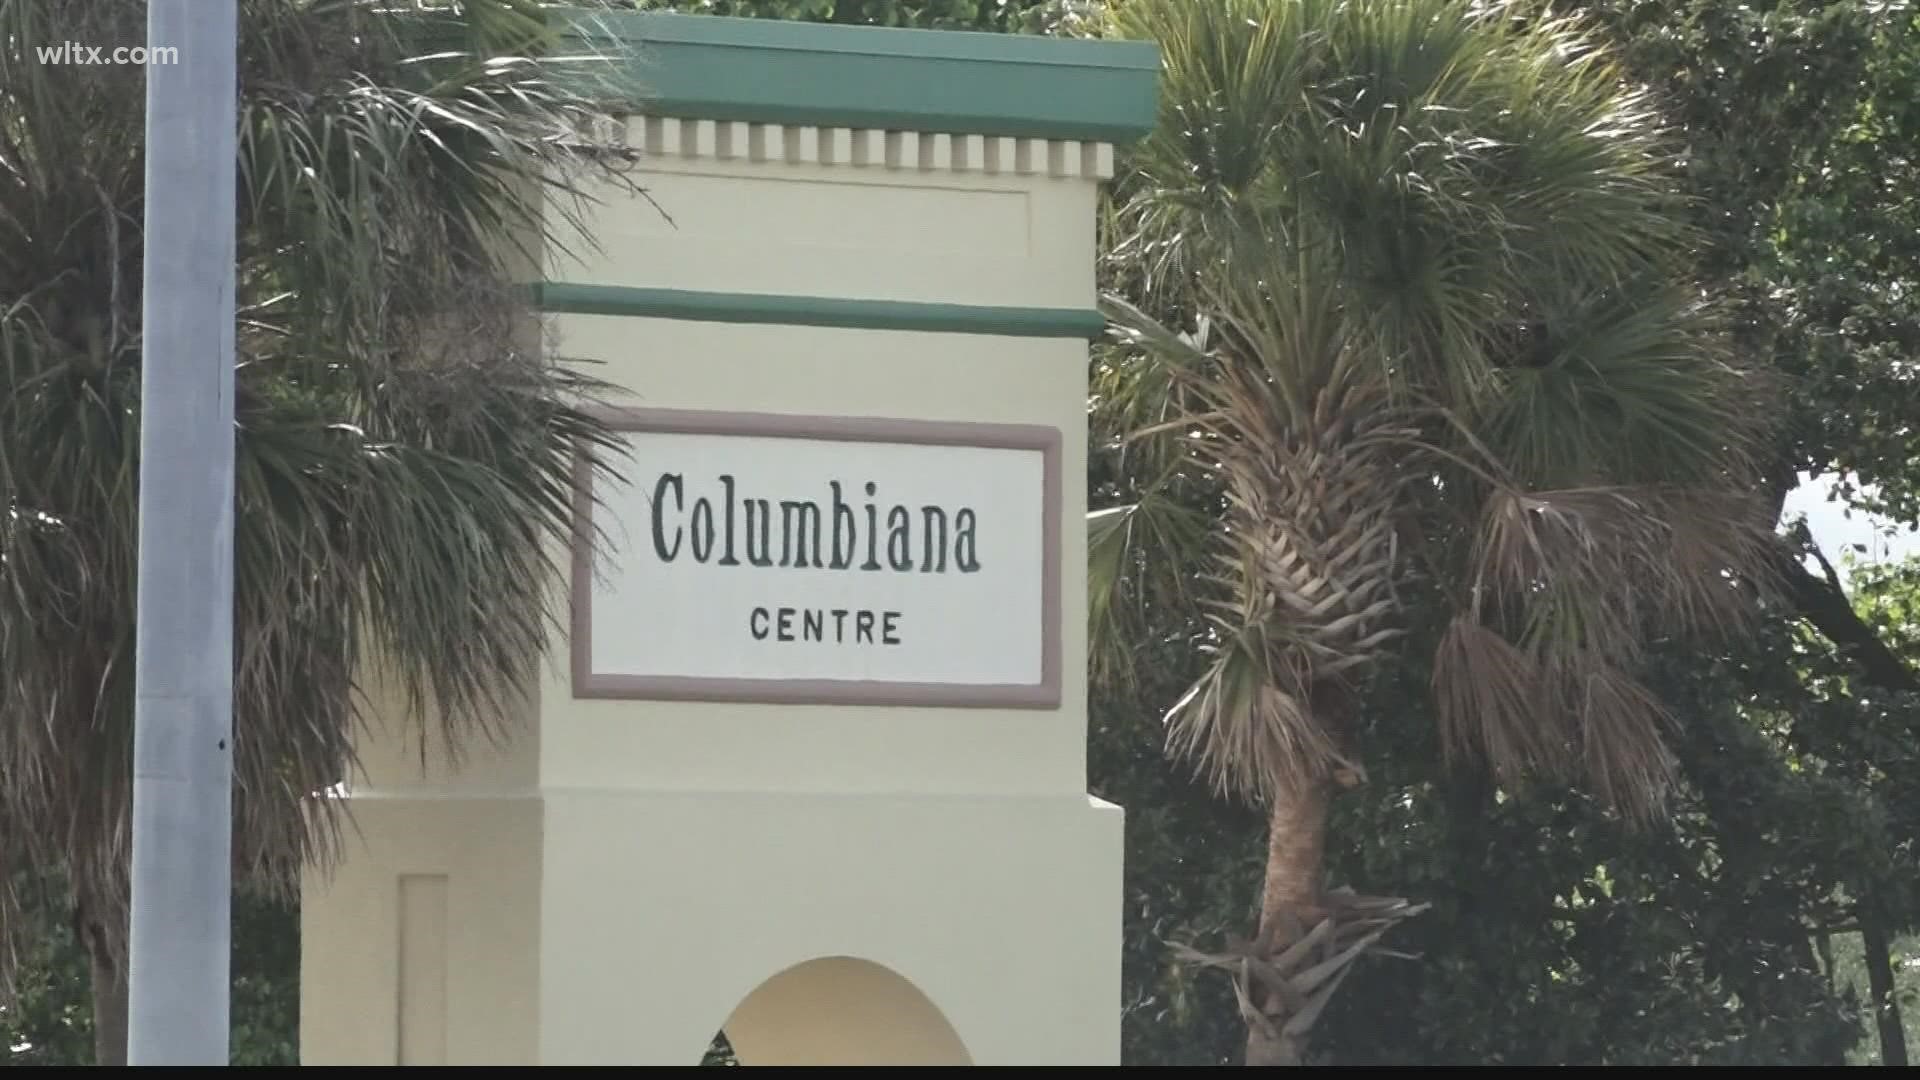 A woman and a teenager are facing charges after police say they brought a loaded gun and showed it to other people at the Columbiana Centre Mall in Harbison.